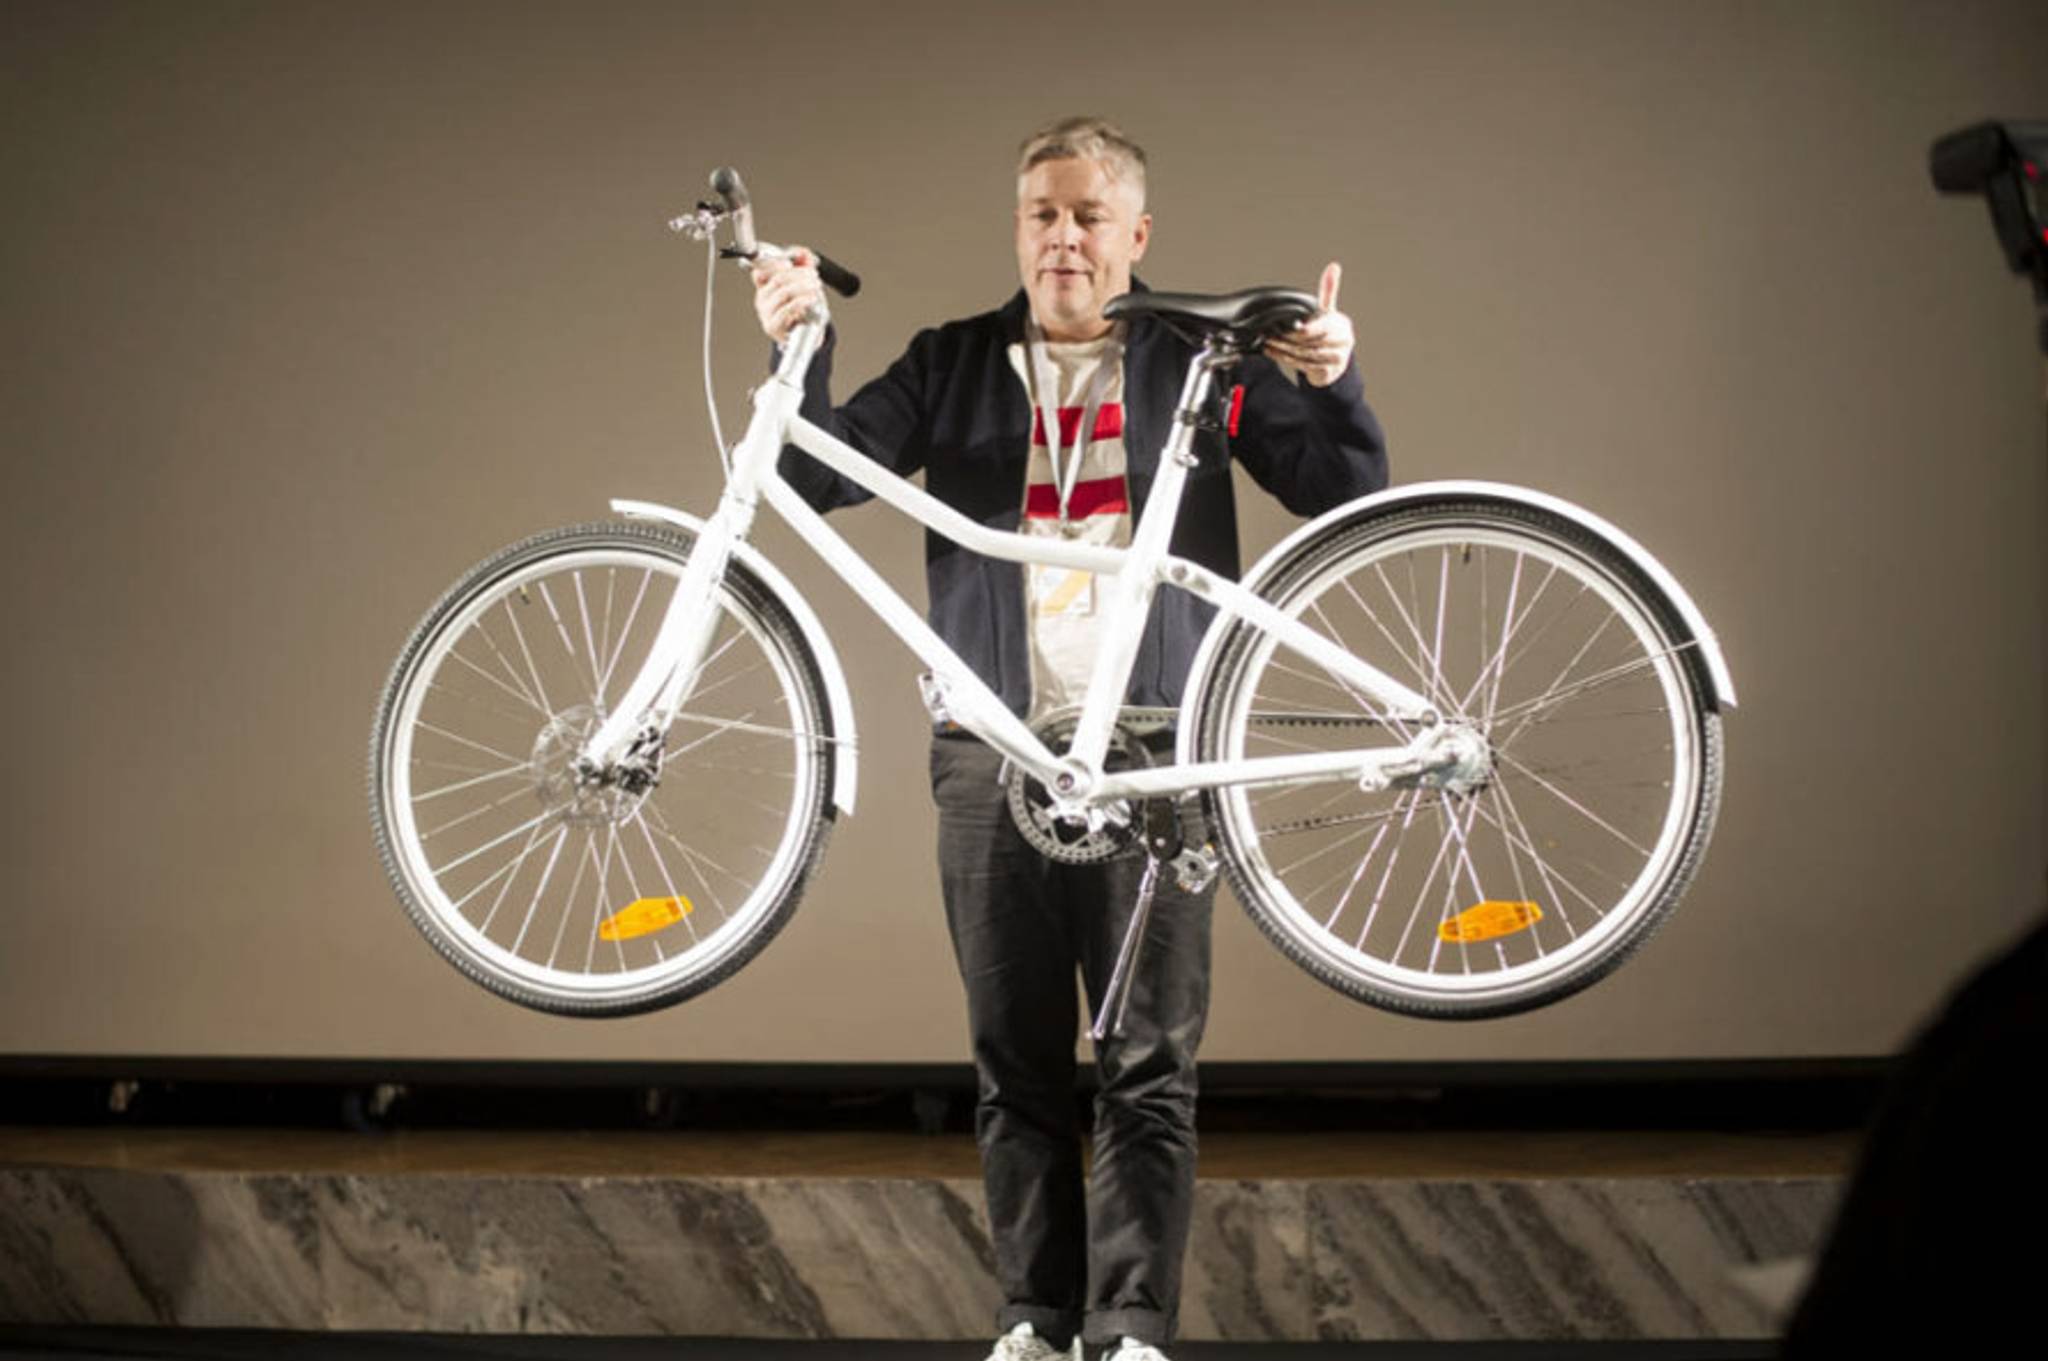 IKEA is launching a chainless bicycle